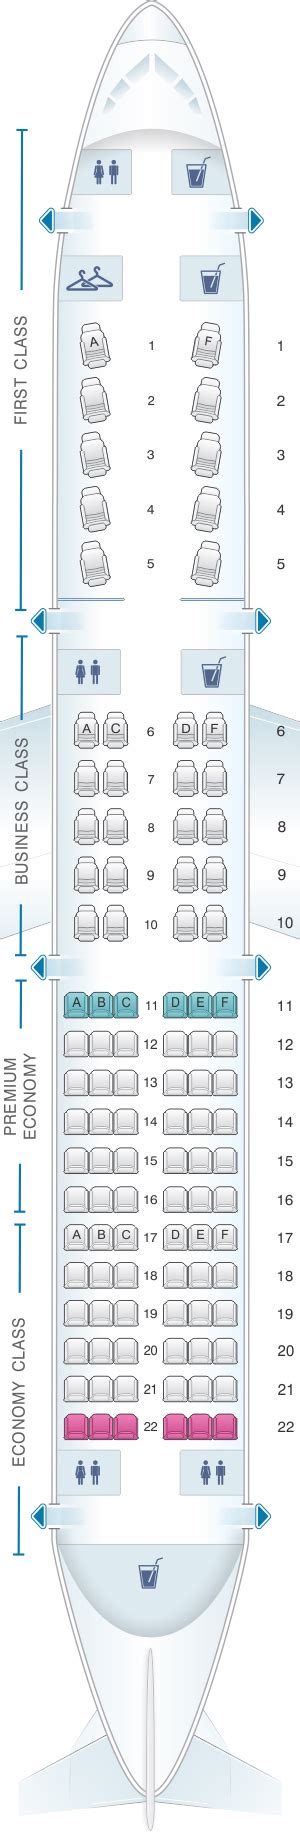 American Airlines A321 Seat Map